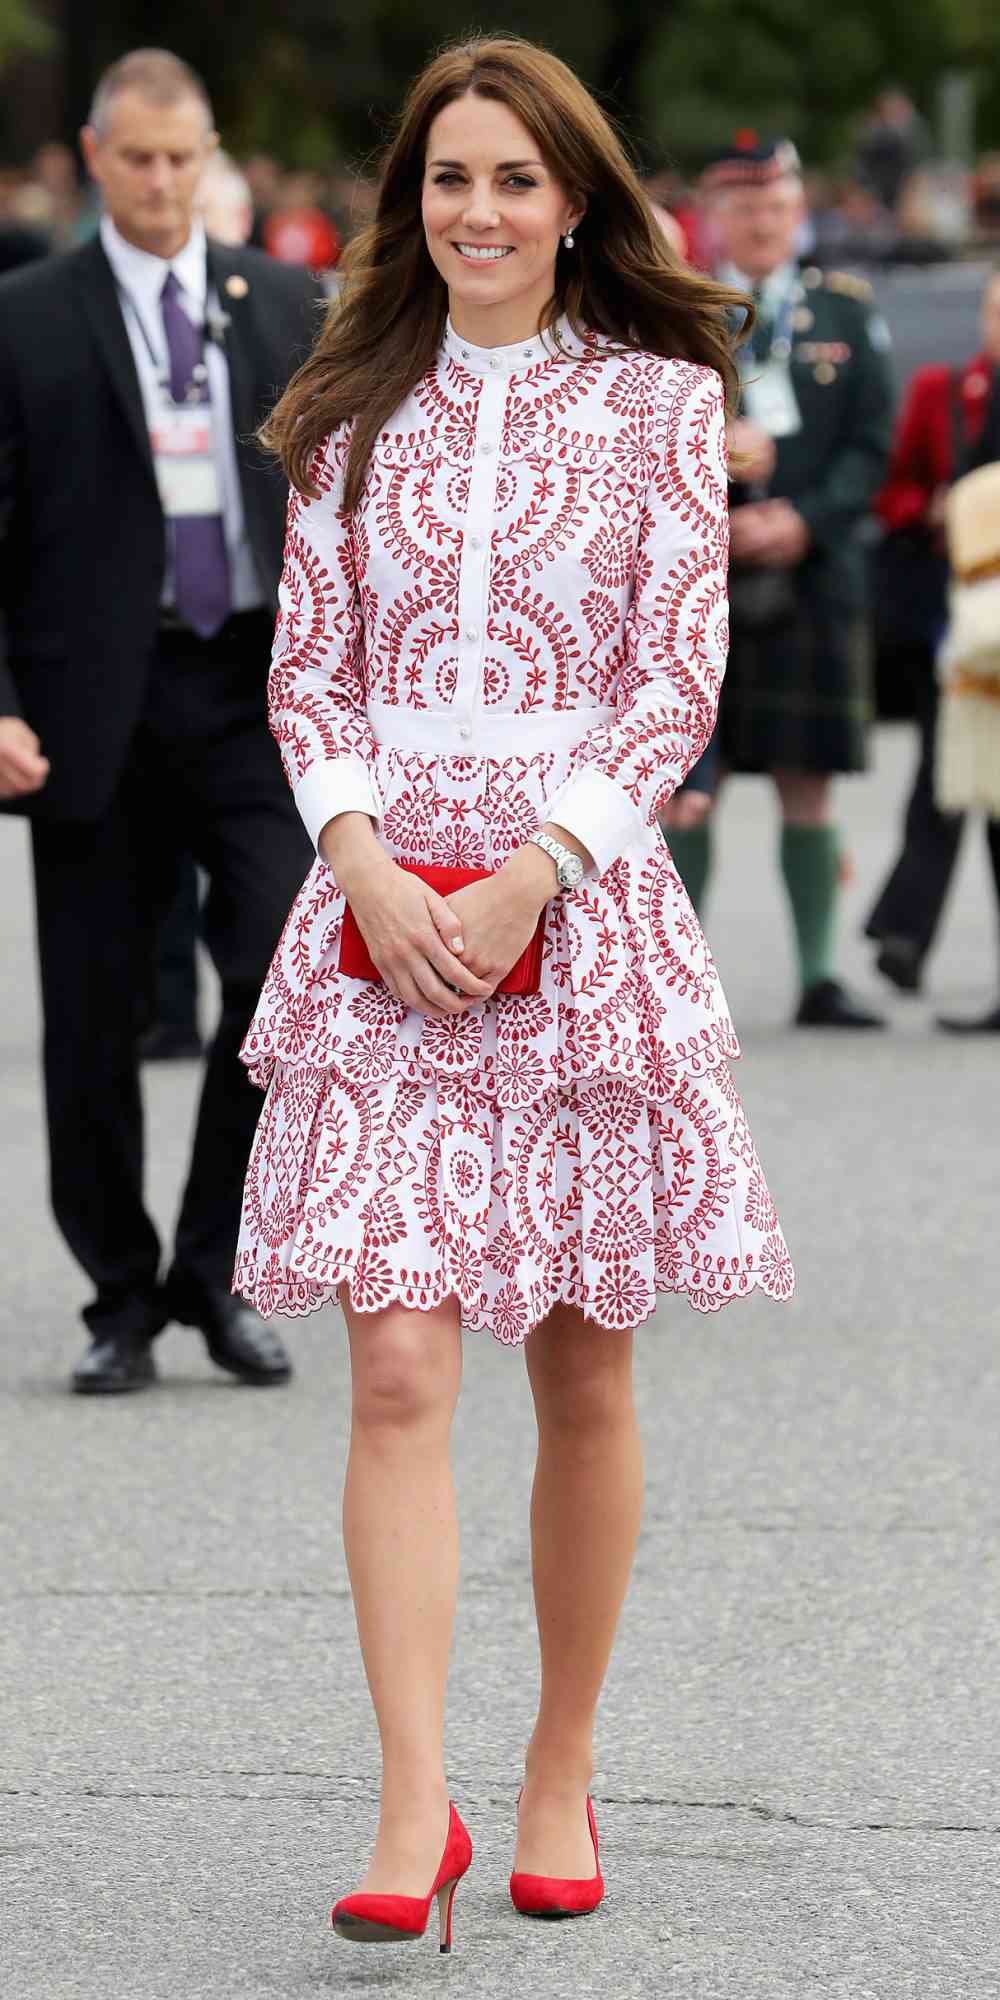 Kate Middleton in a red and white dress by Alexander McQueen